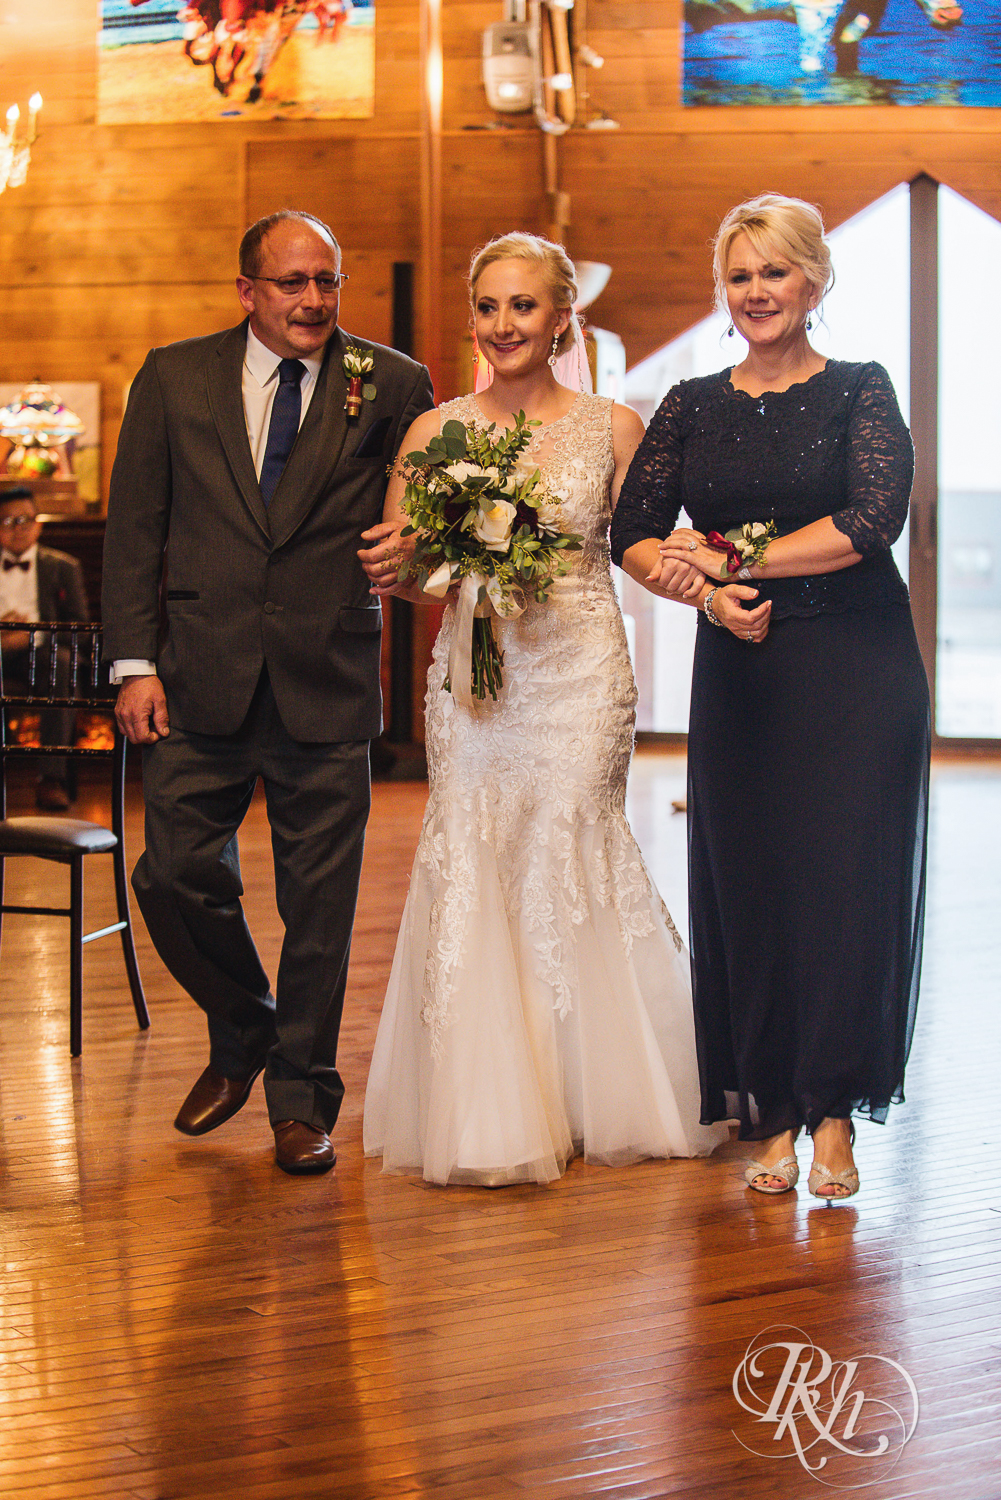 Bride walks down the aisle with parents at Green Acres Event Center barn wedding ceremony in Eden Prairie, Minnesota.